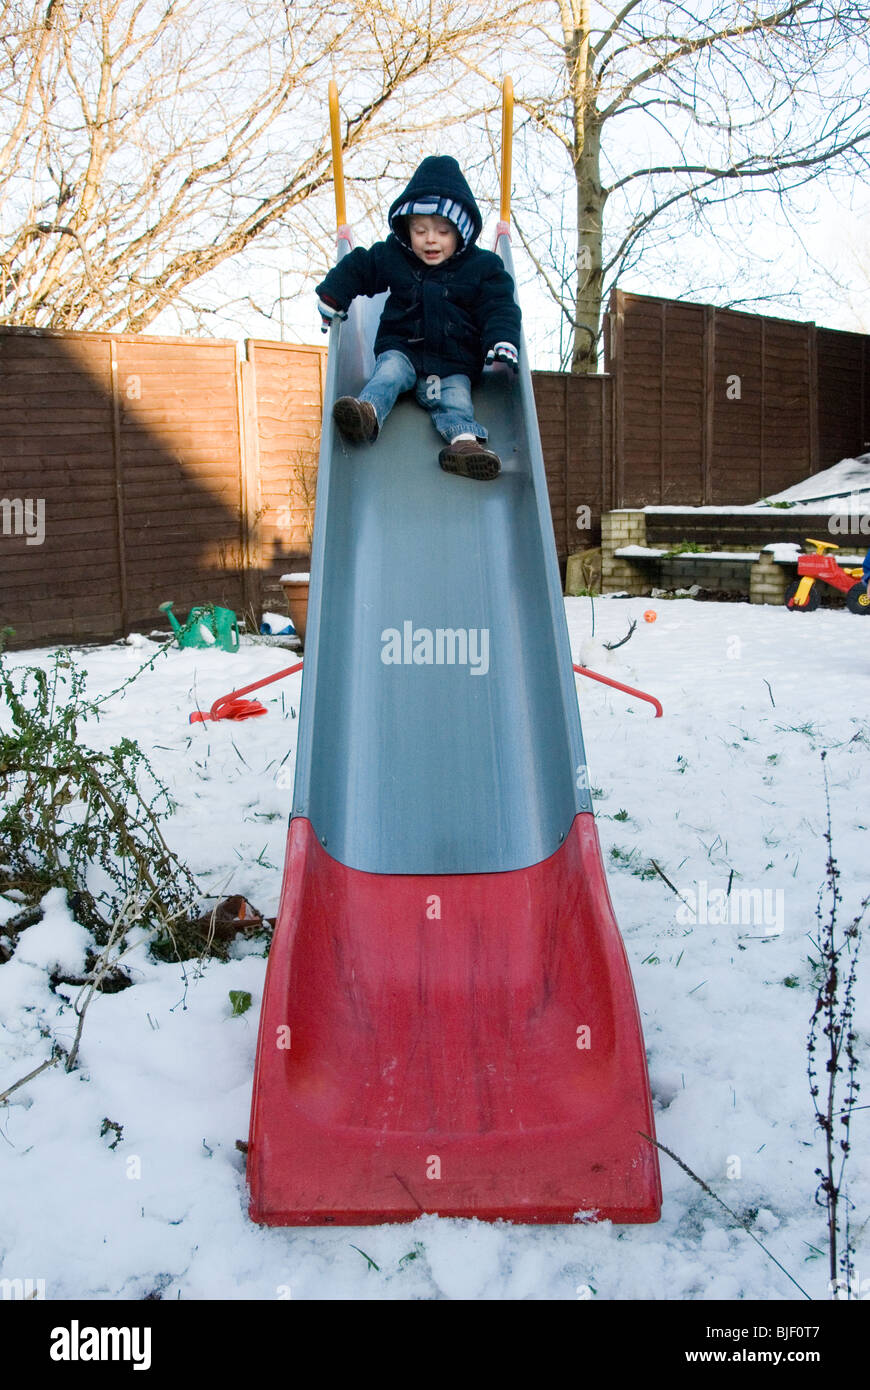 Little Boy Toddler Playing on a Slide in Back Garden in Snow, Christmas Day, Sheffield 2009 Stock Photo